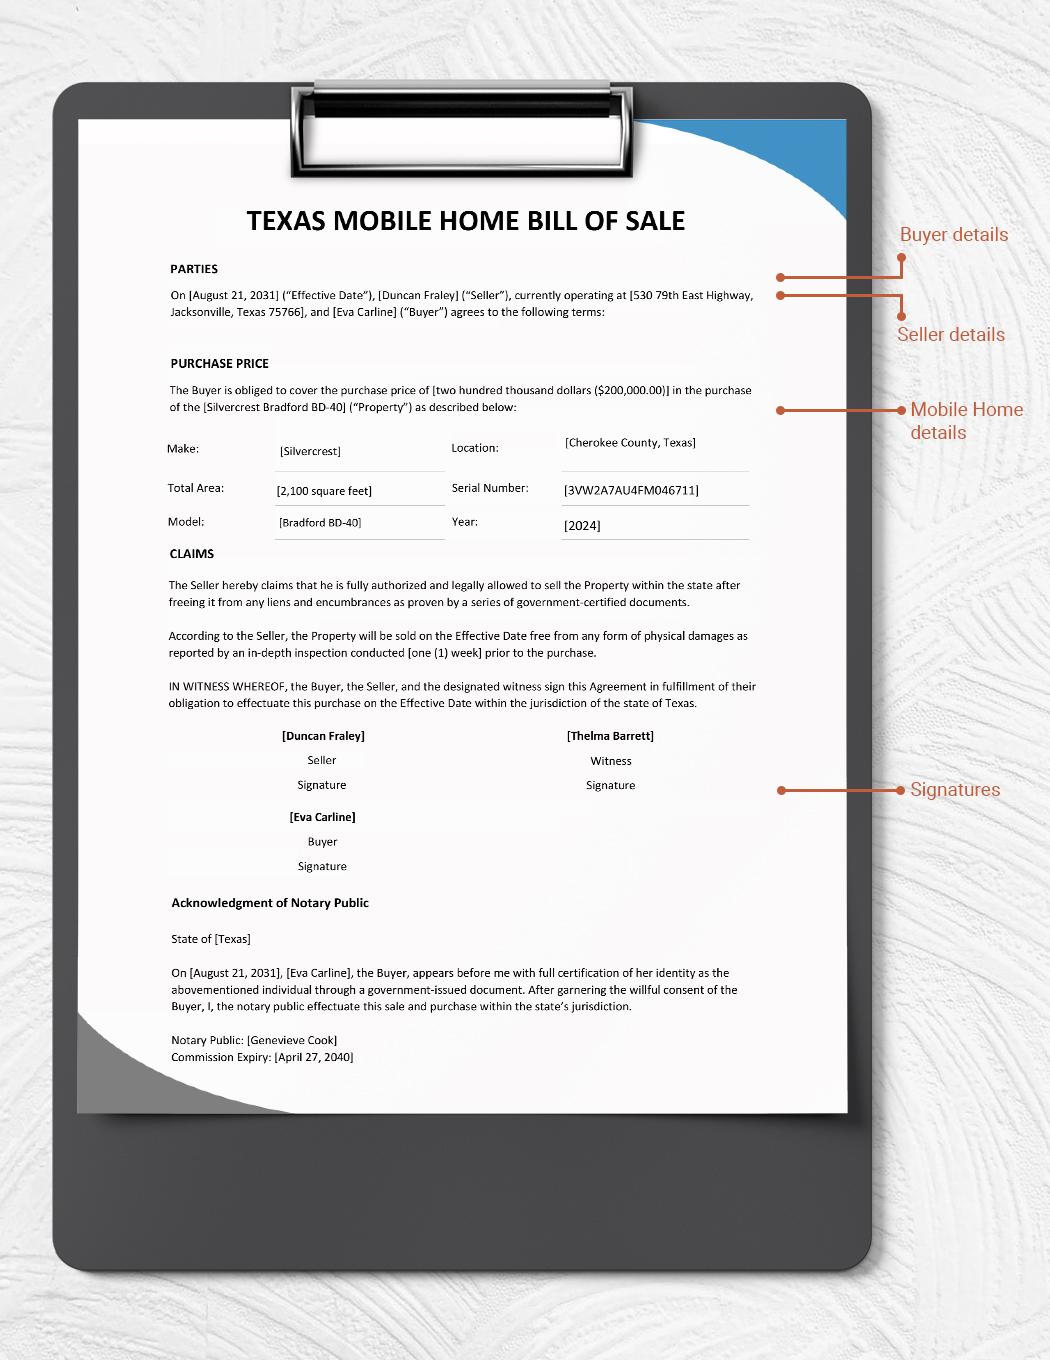 Texas Mobile Home Bill of Sale Template